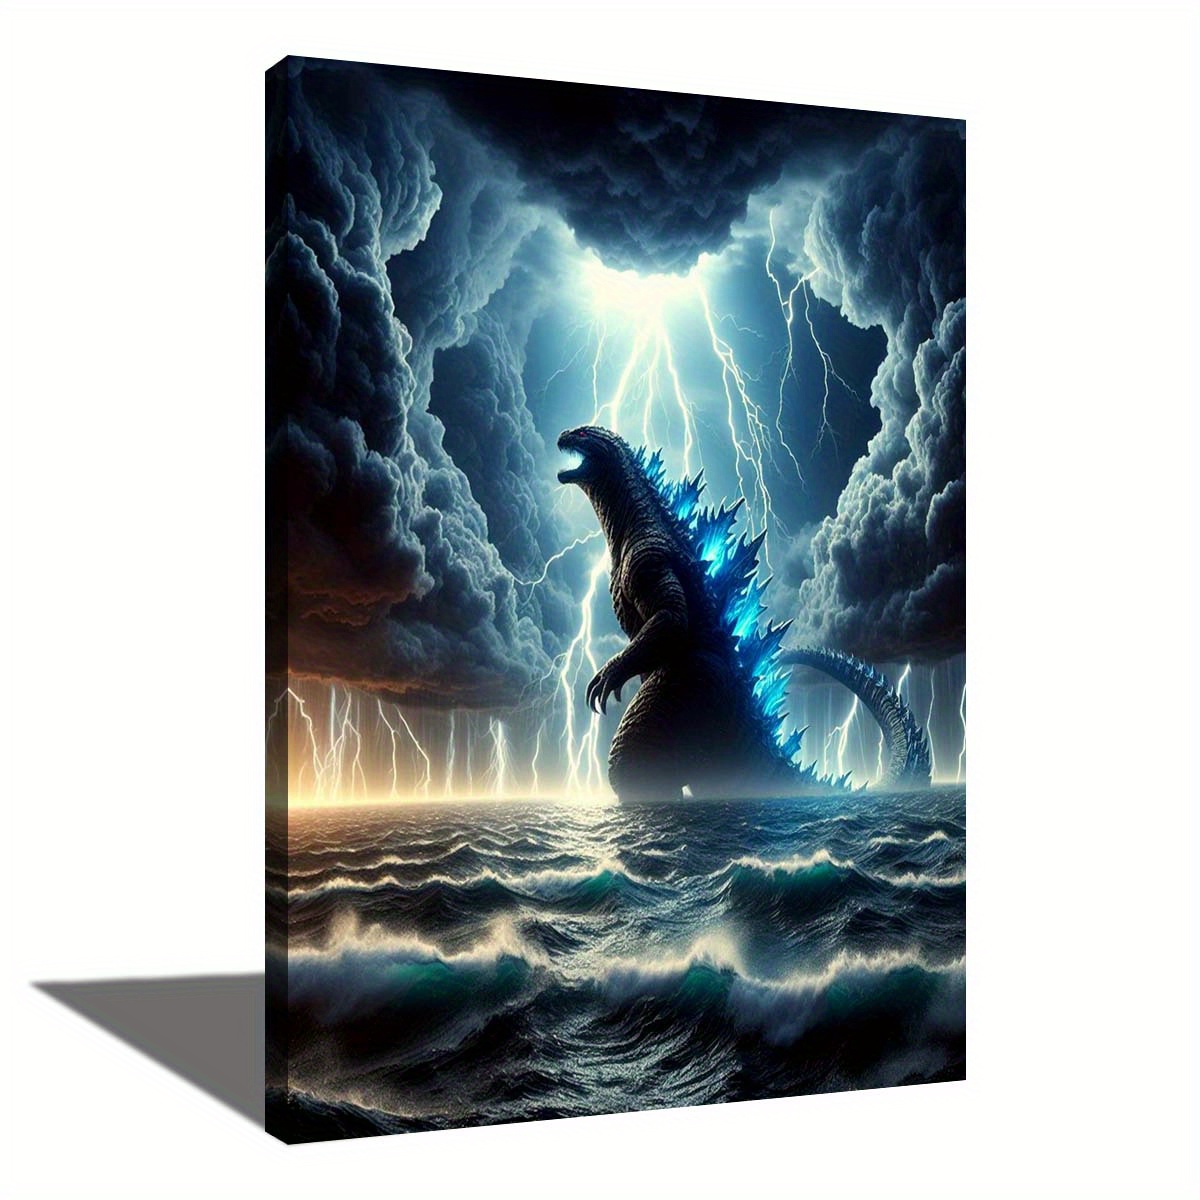 

Framed Canvas Poster Drache Echse Dinosaurier Wall Decor Picture For Bedroom Living Room Home Office, Home Decor, Cafe Decor